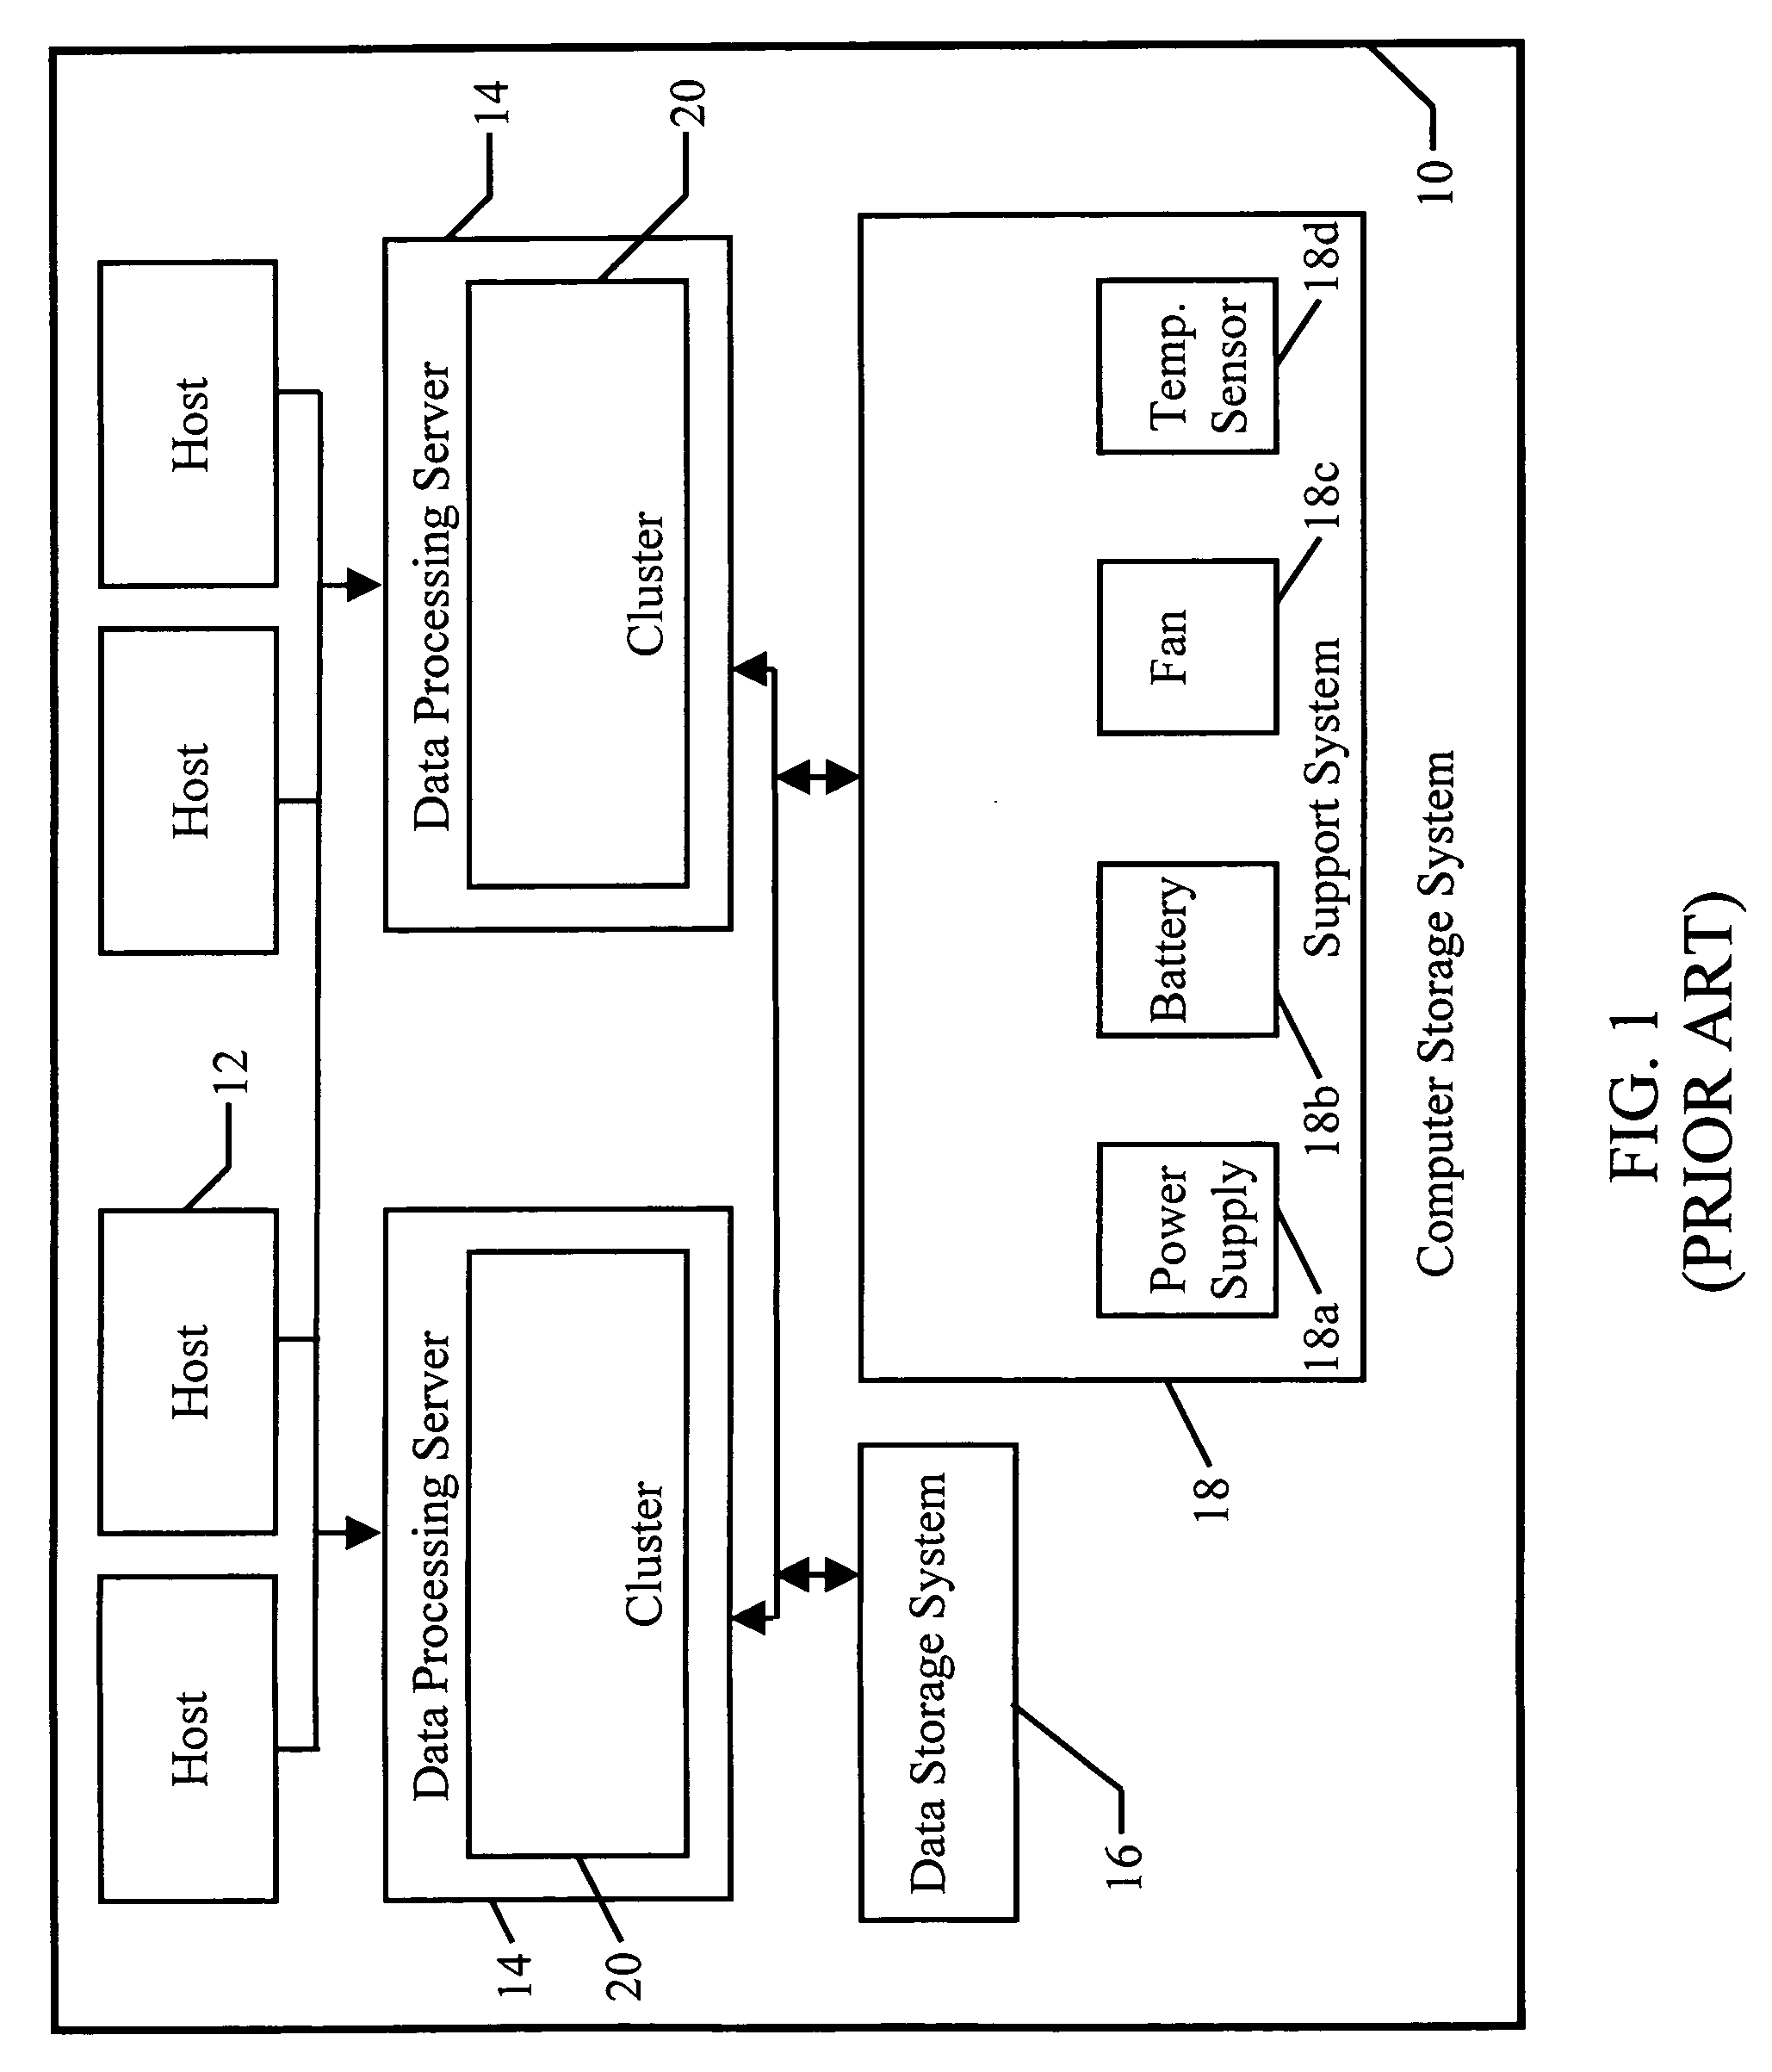 Multi-image hardware access system for managing access to computer support systems